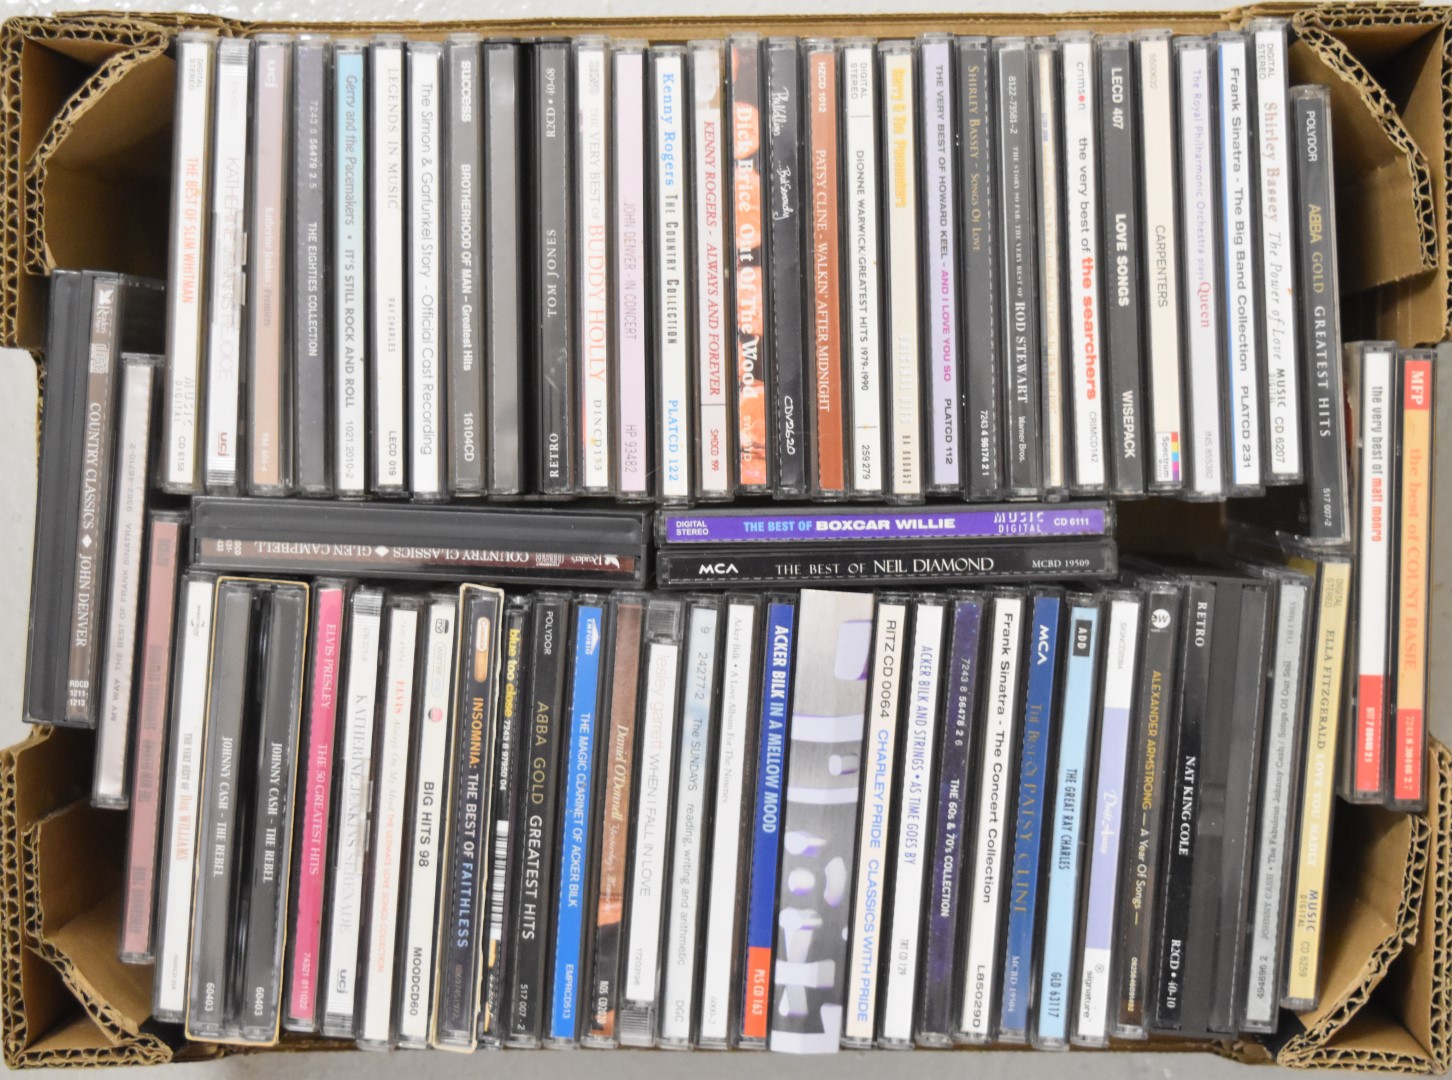 Approximately 65 mixed genre CDs including Abba, Buddy Holly, Dionne Warwick, Frank Sinatra, Ray